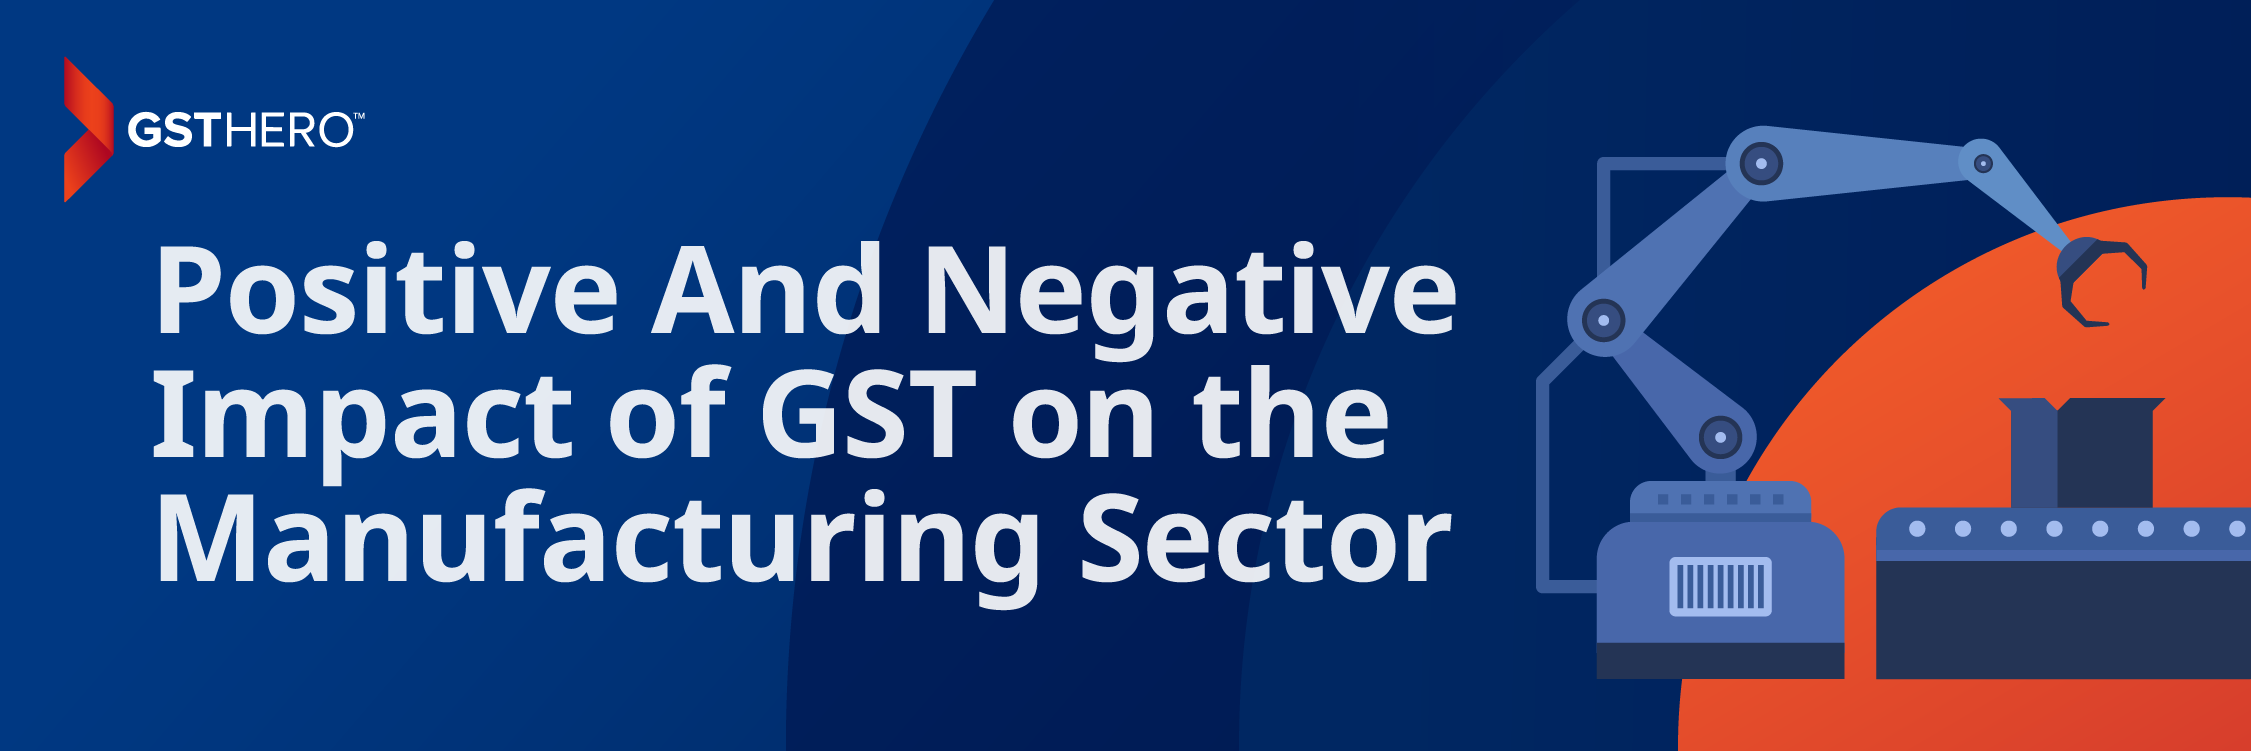 Positive And Negative Impact of GST on the Manufacturing Sector Banner 1